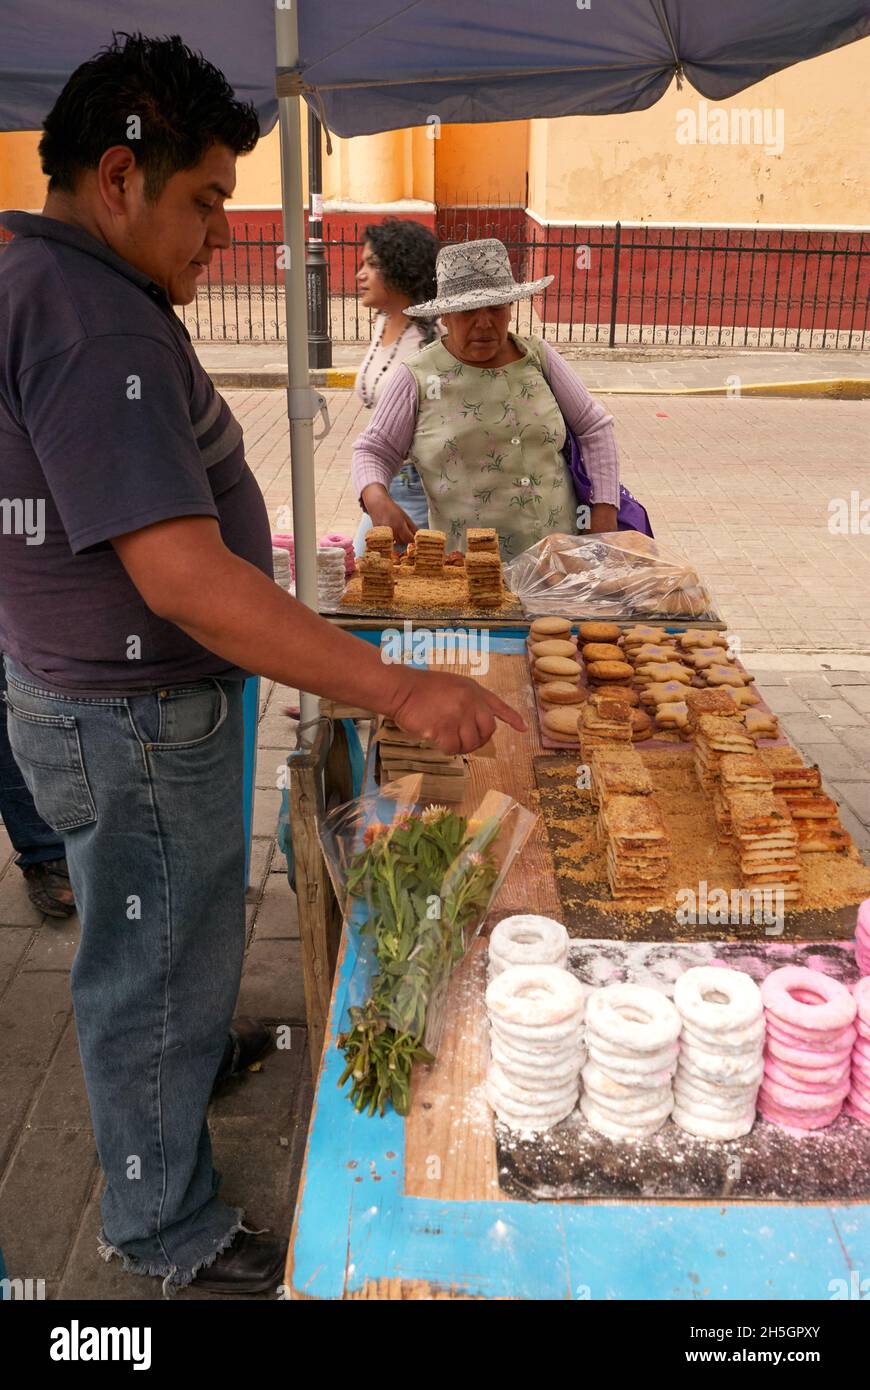 Elderly woman buying Mexican baked goods from a street vendor in Cholula, Puebla, Mexico Stock Photo